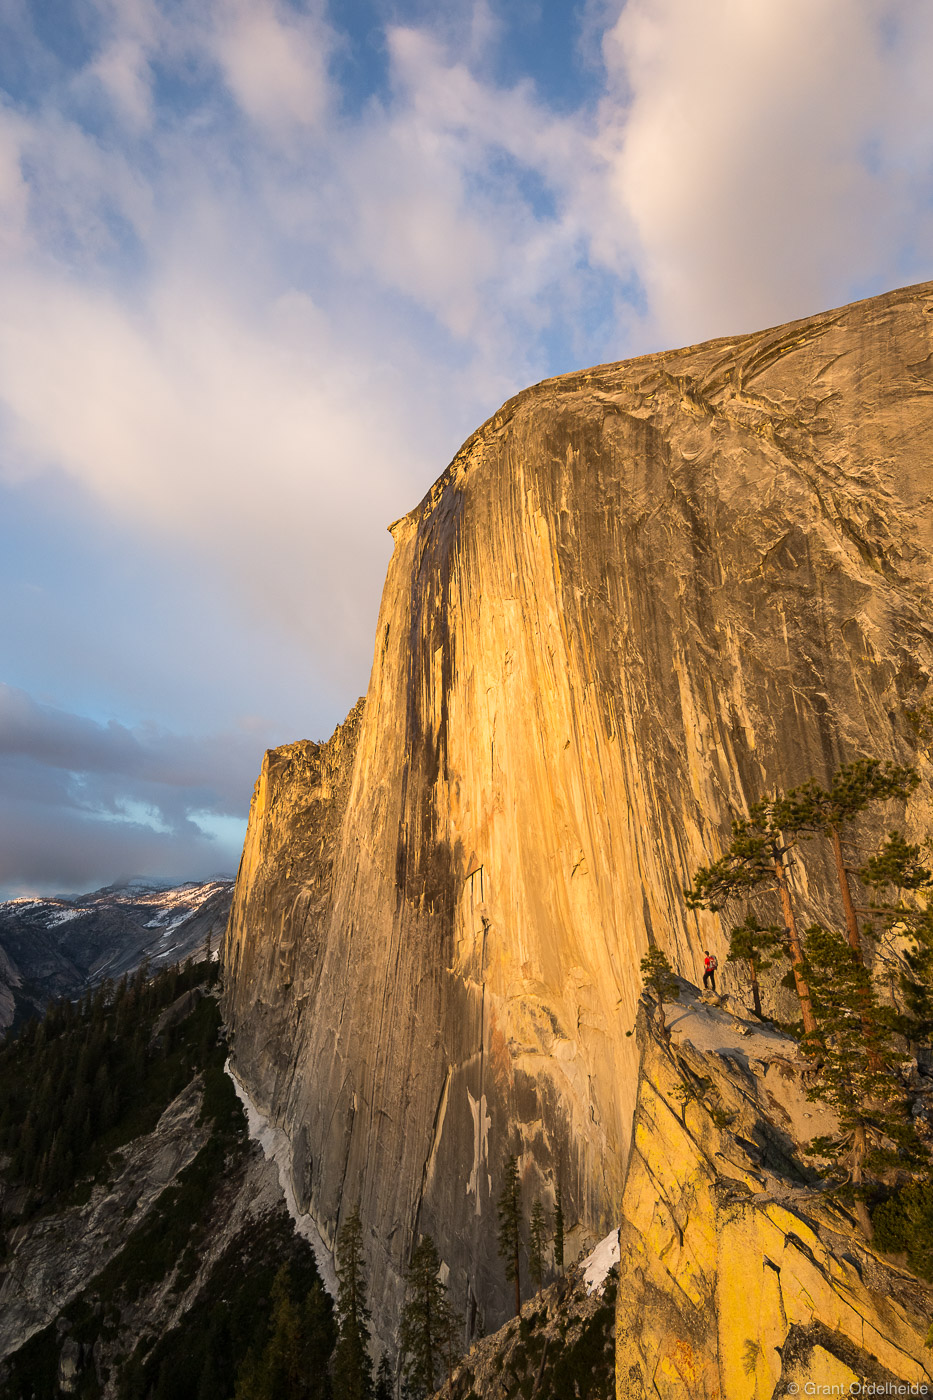 A hiker looking out over the monolithic northwest face of Half Dome in California's Yosemite National Park.